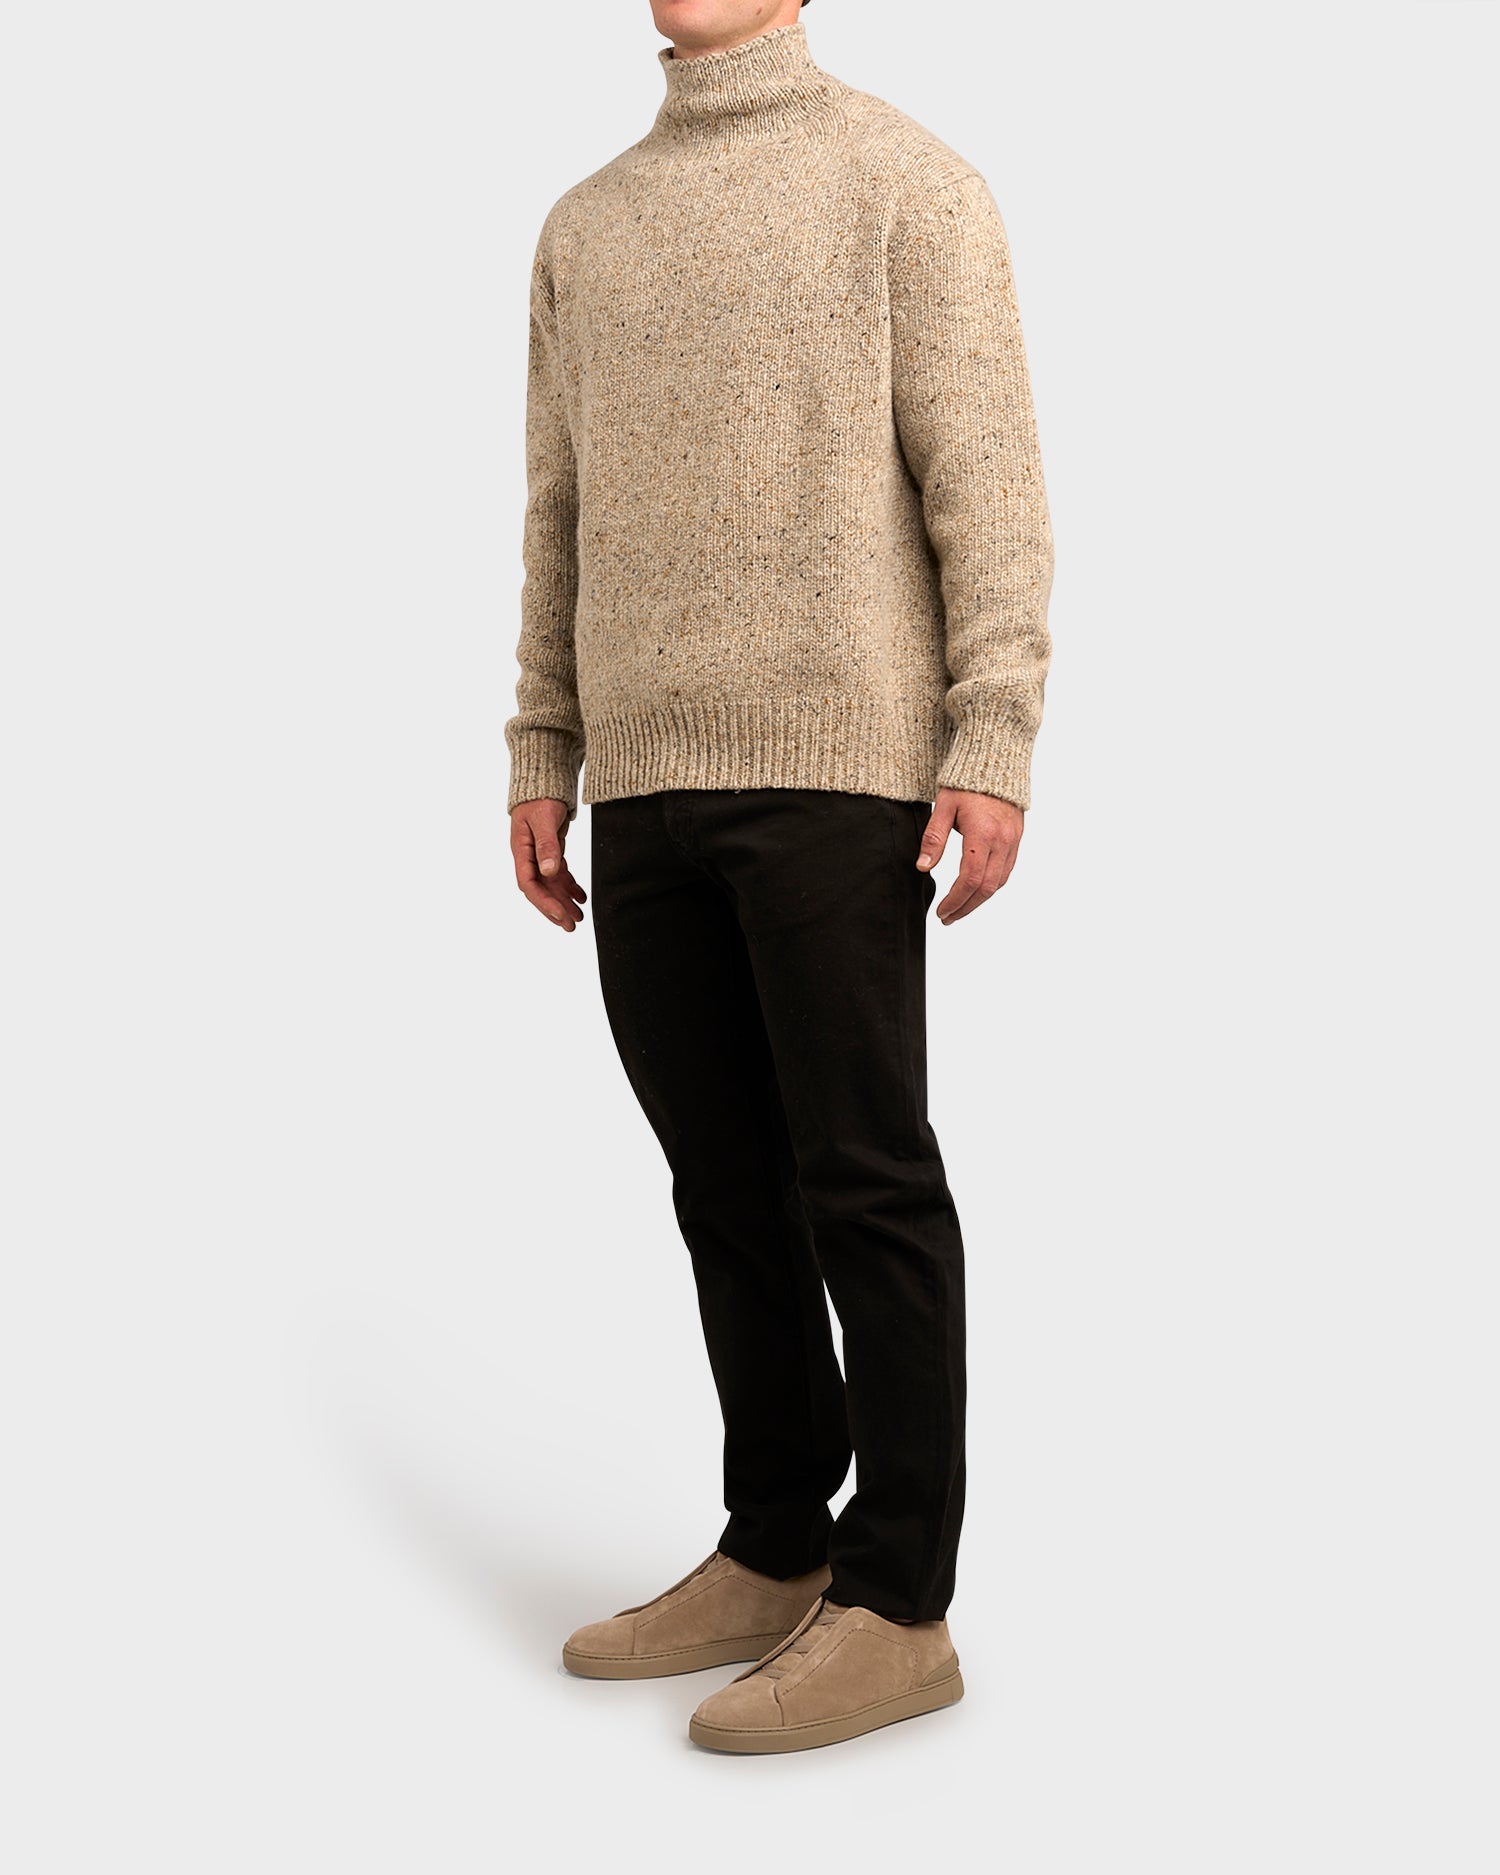 Oatmeal Oasi Cashmere Roll Neck Knit Sweater